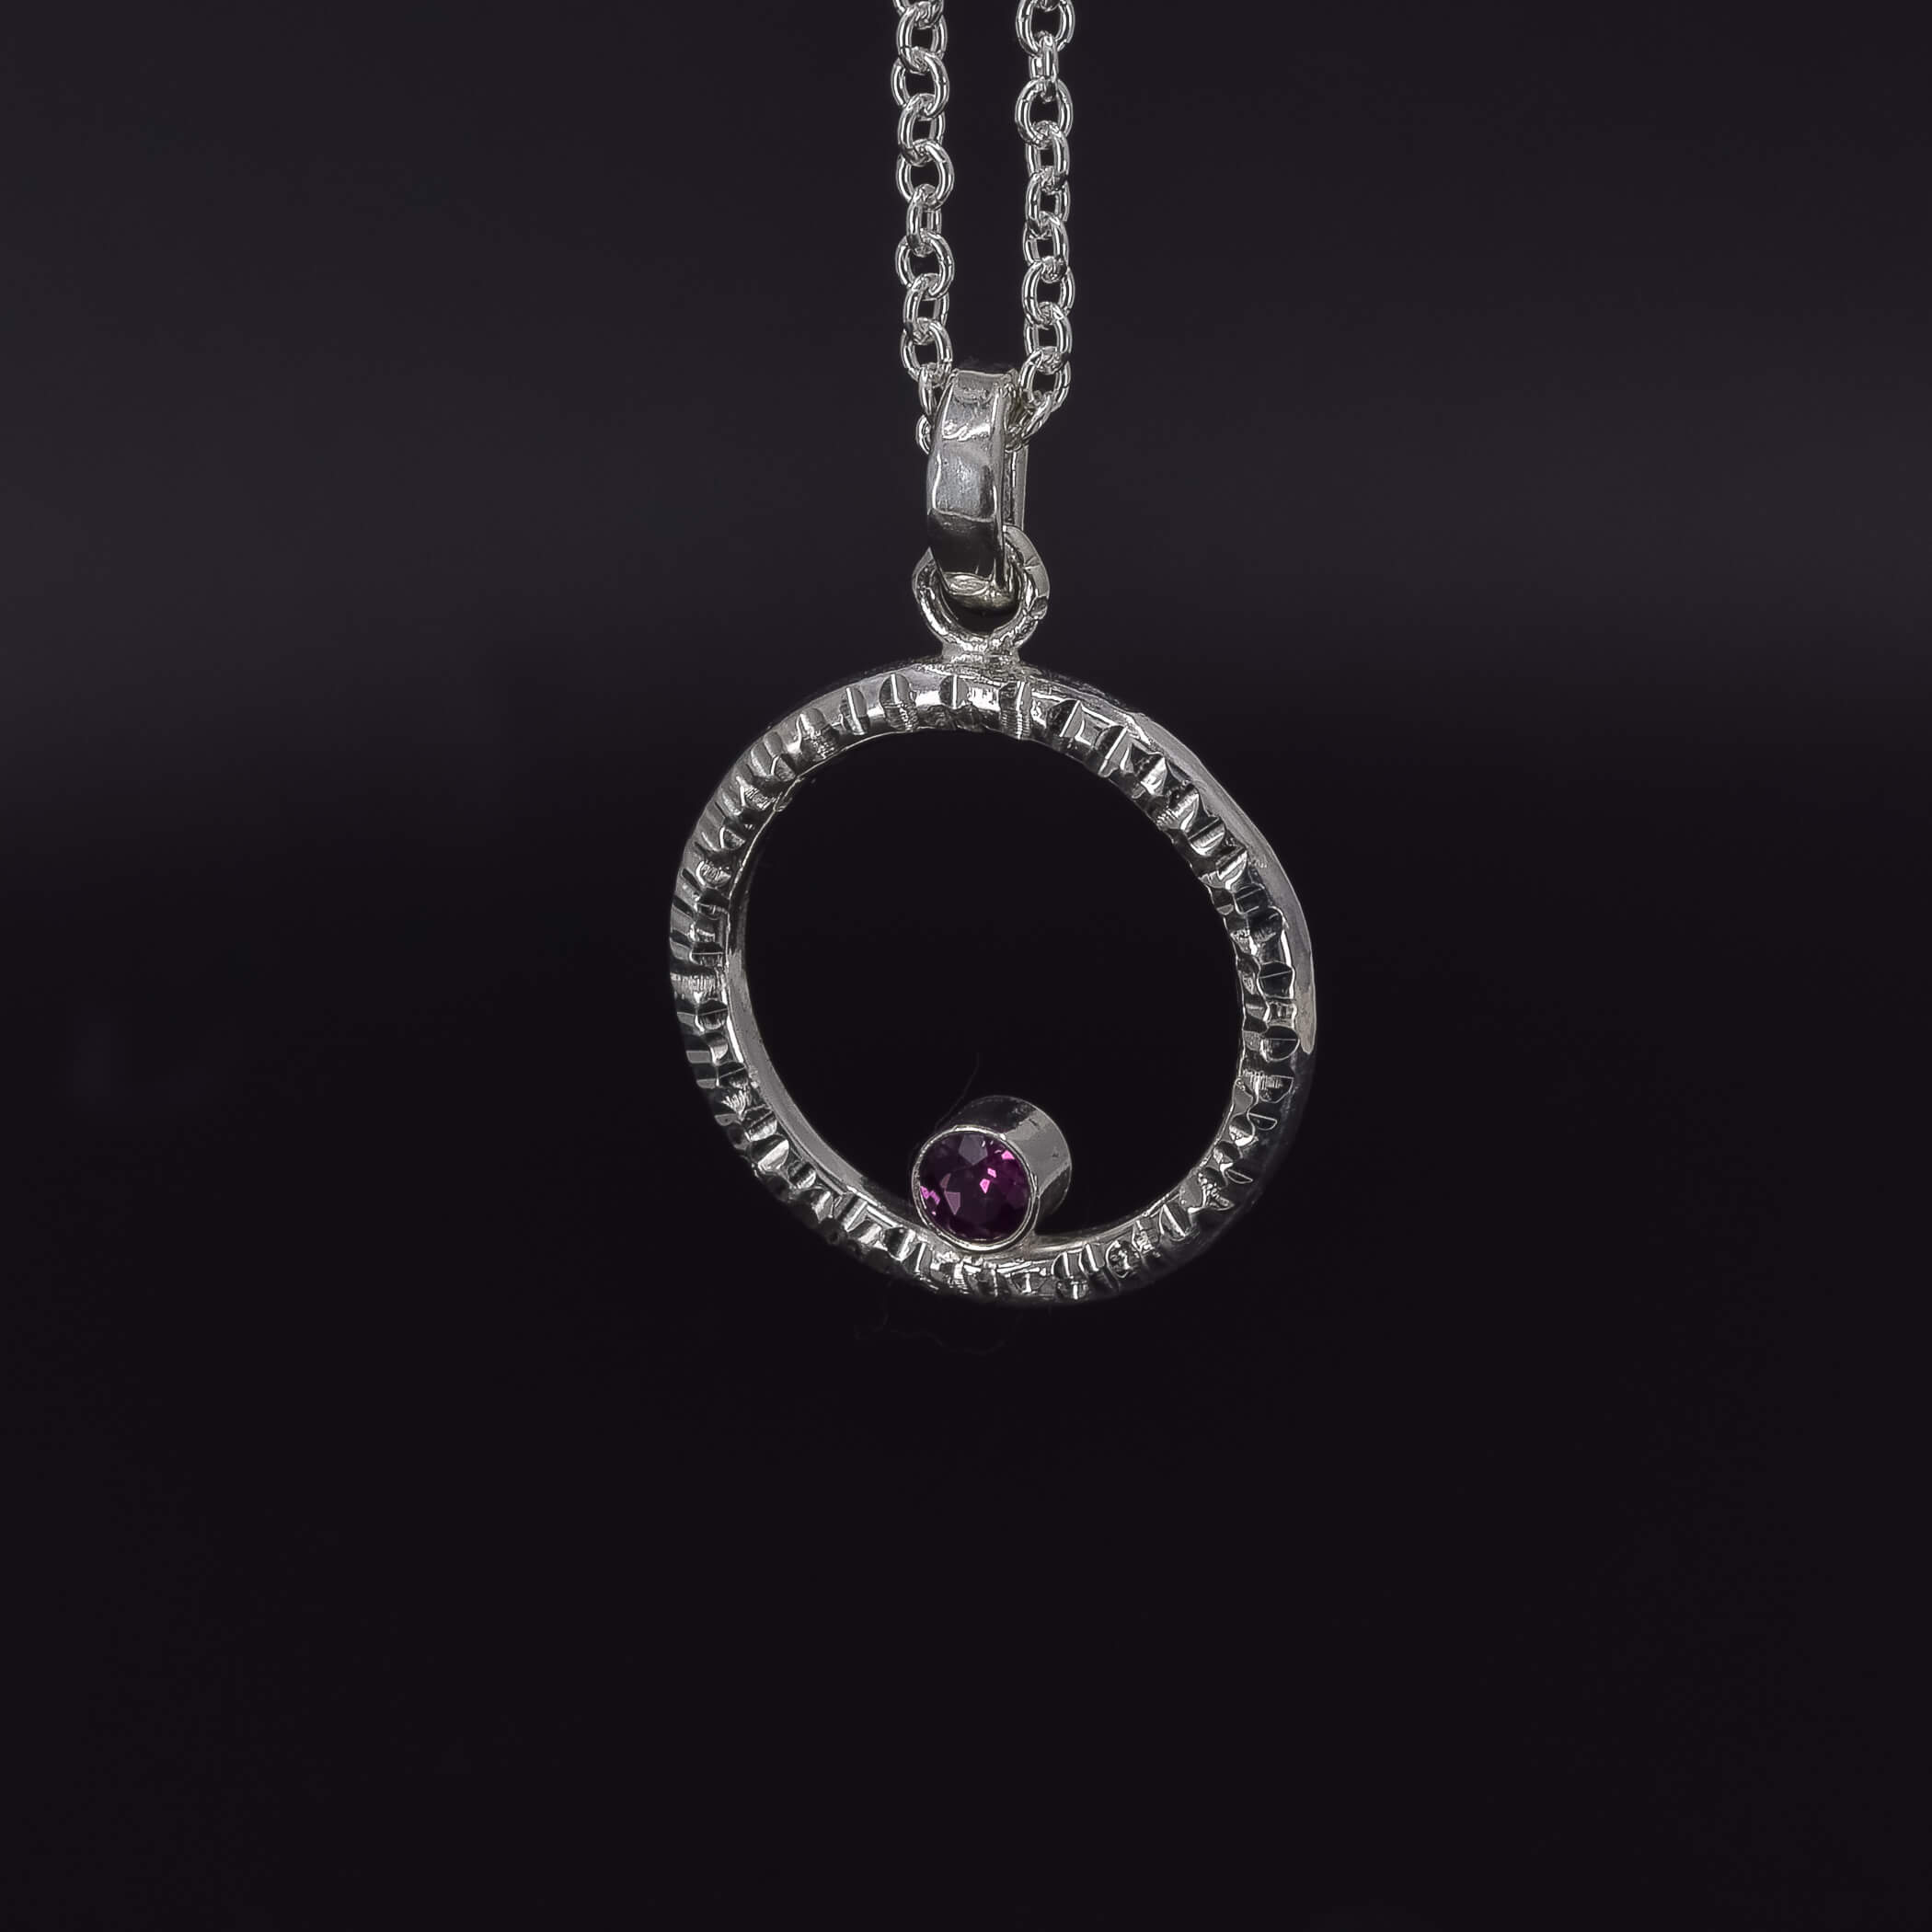 Circle of life pendant necklace in sterling silver with textured edges, featuring a rhodolite garnet faceted stone side view